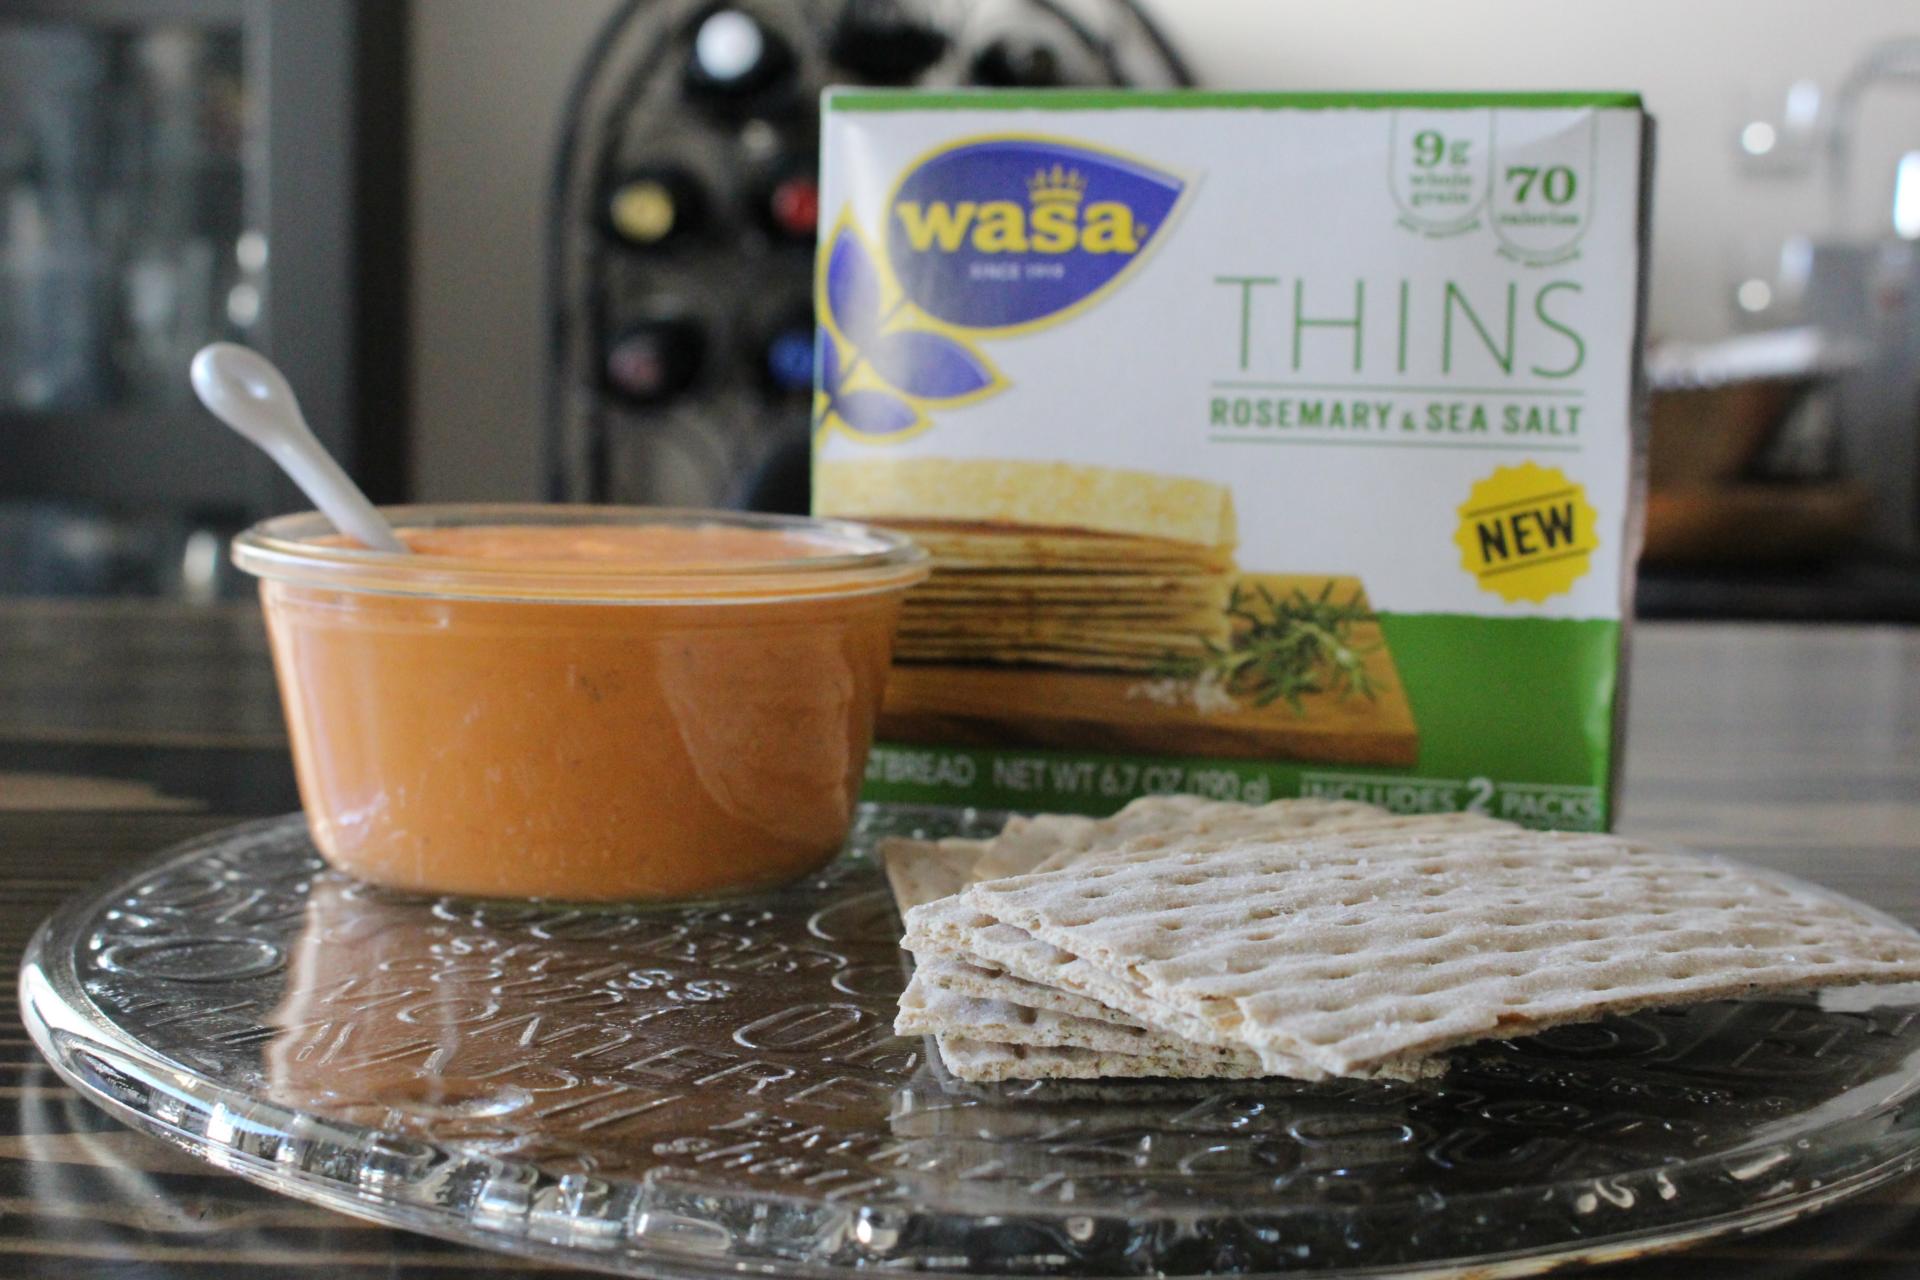 SAUCES AND SPREADS: Roasted Red Pepper Goat Cheese Spread with Wasa